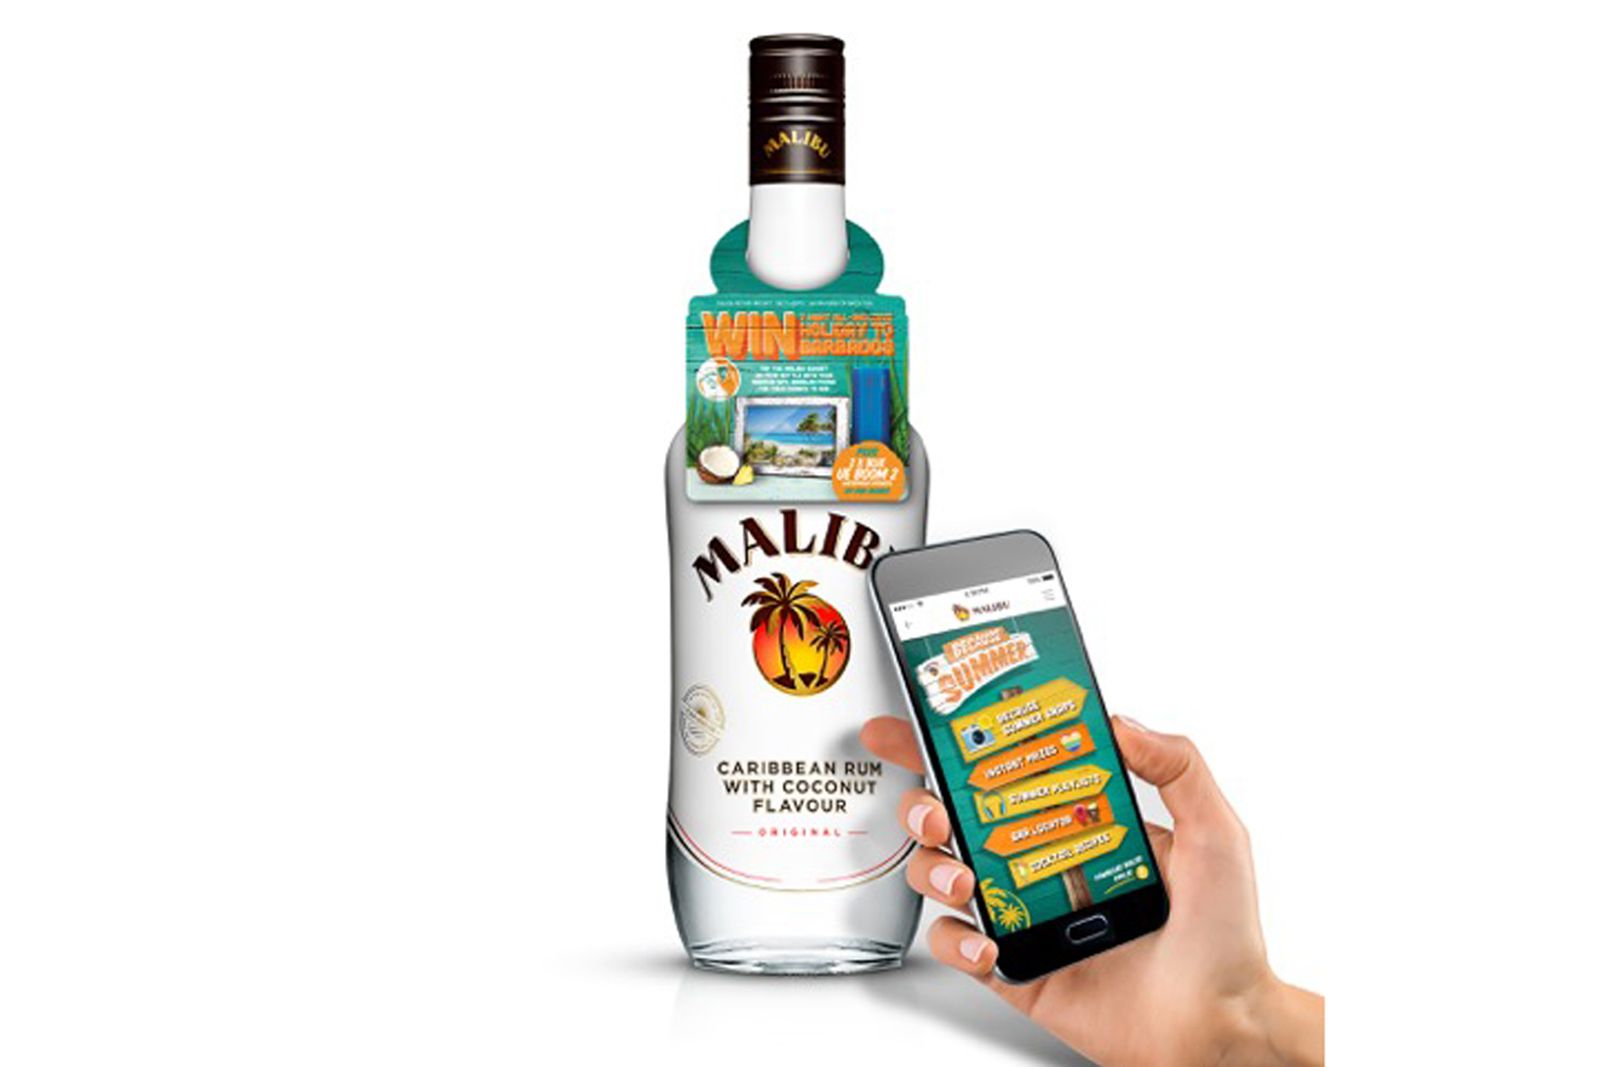 malibu bottles get connected with nfc because summer image 1